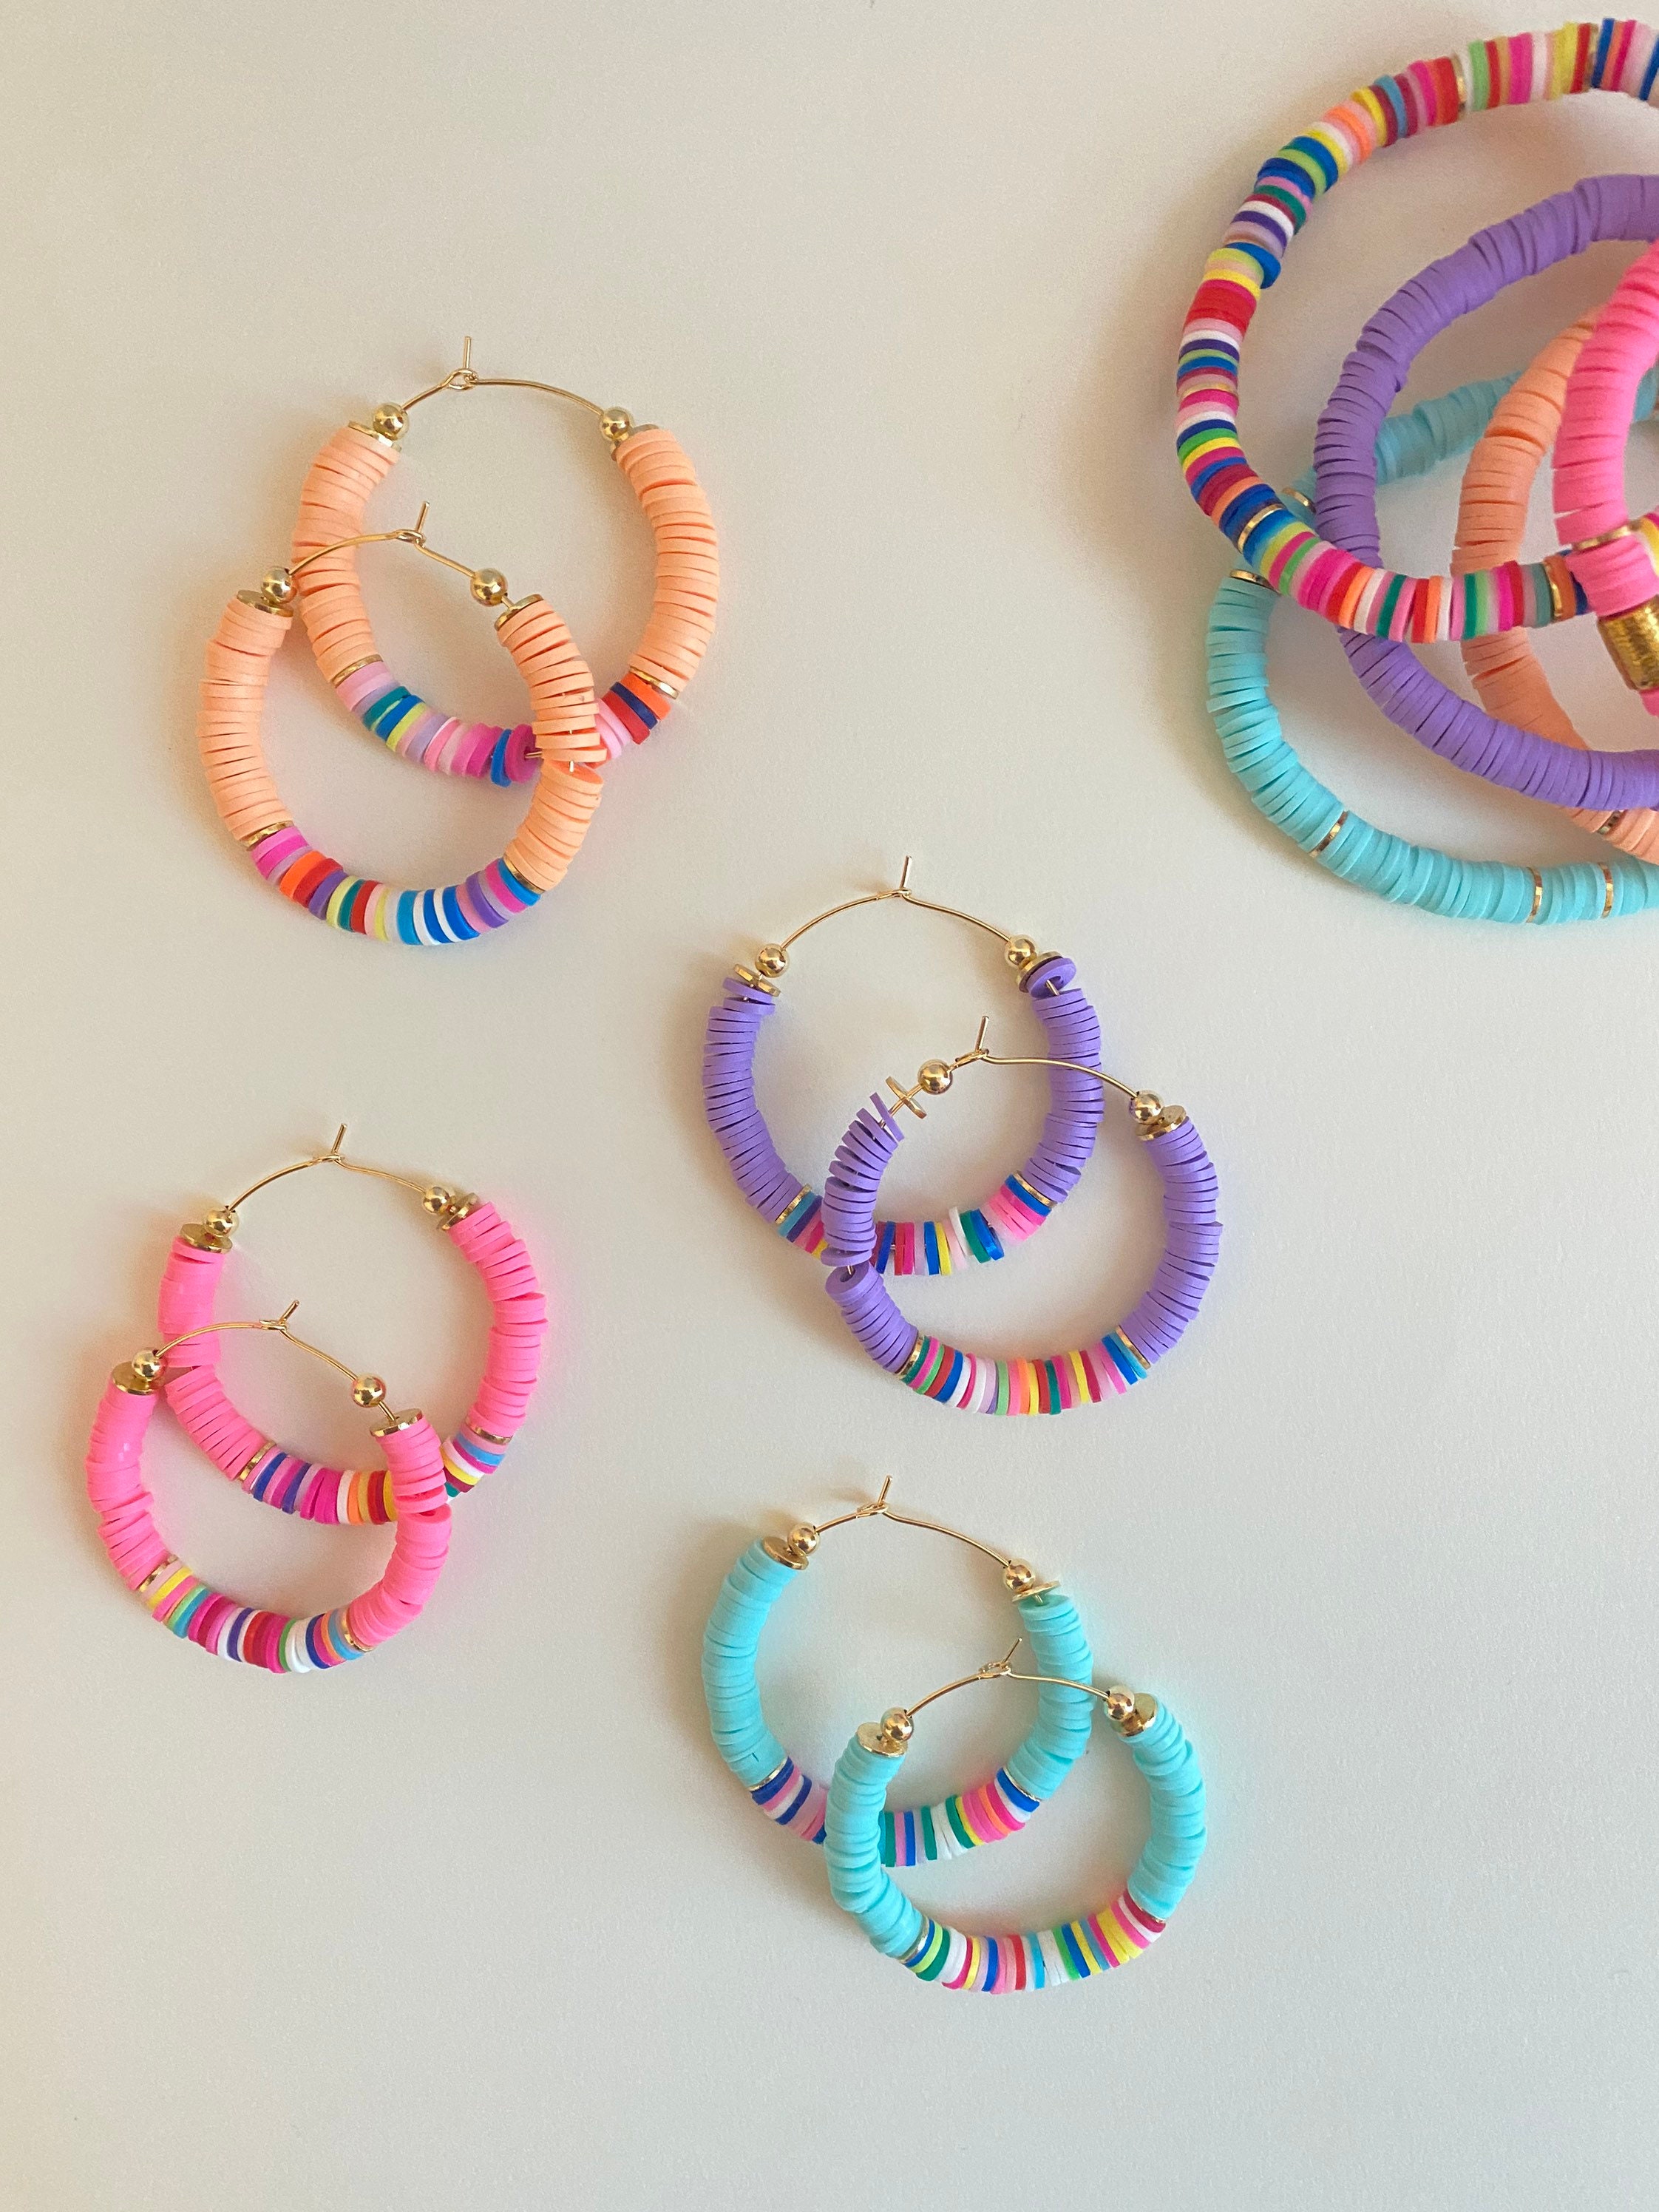 How to Use Clip-on Earrings with Metal Beads and Charms — Beadaholique